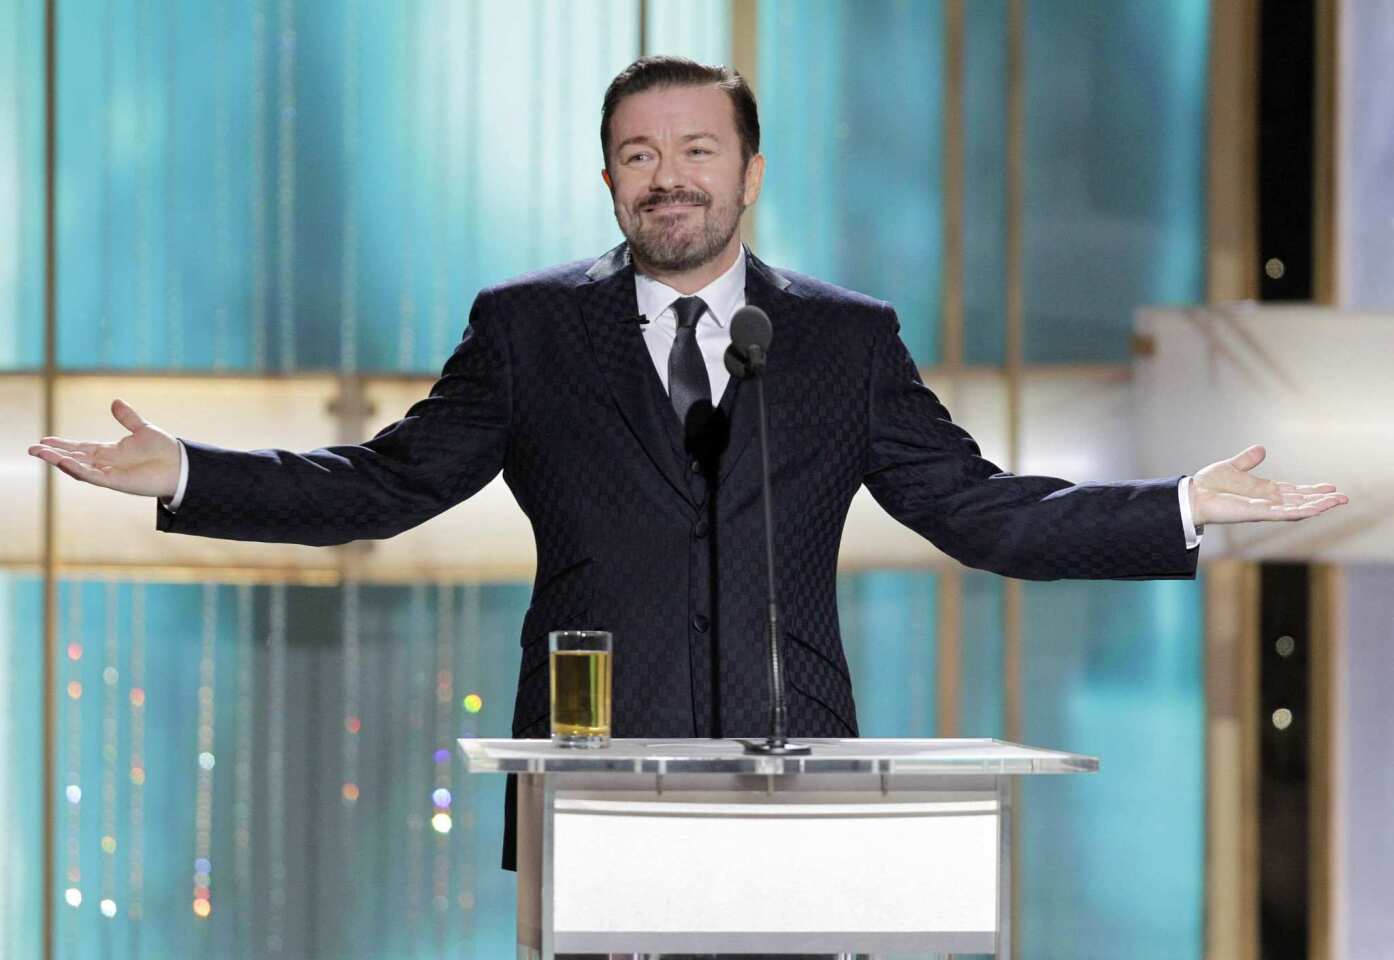 Ricky Gervais is set to host the Golden Globe Awards ceremony for the third consecutive year on Sunday. No doubt the nominees remember Gervais' notorious second tour as host in 2011. At the Hollywood Foreign Press Assn.'s annual award show, his jabs at celebrities from Robert Downey Jr. to the HFPA's president sparked debate about whether his jokes went too far or were just the right amount of poking fun at Hollywood's rich and famous. Here are 10 of Gervais' best-remembered barbs from the telecast last January.